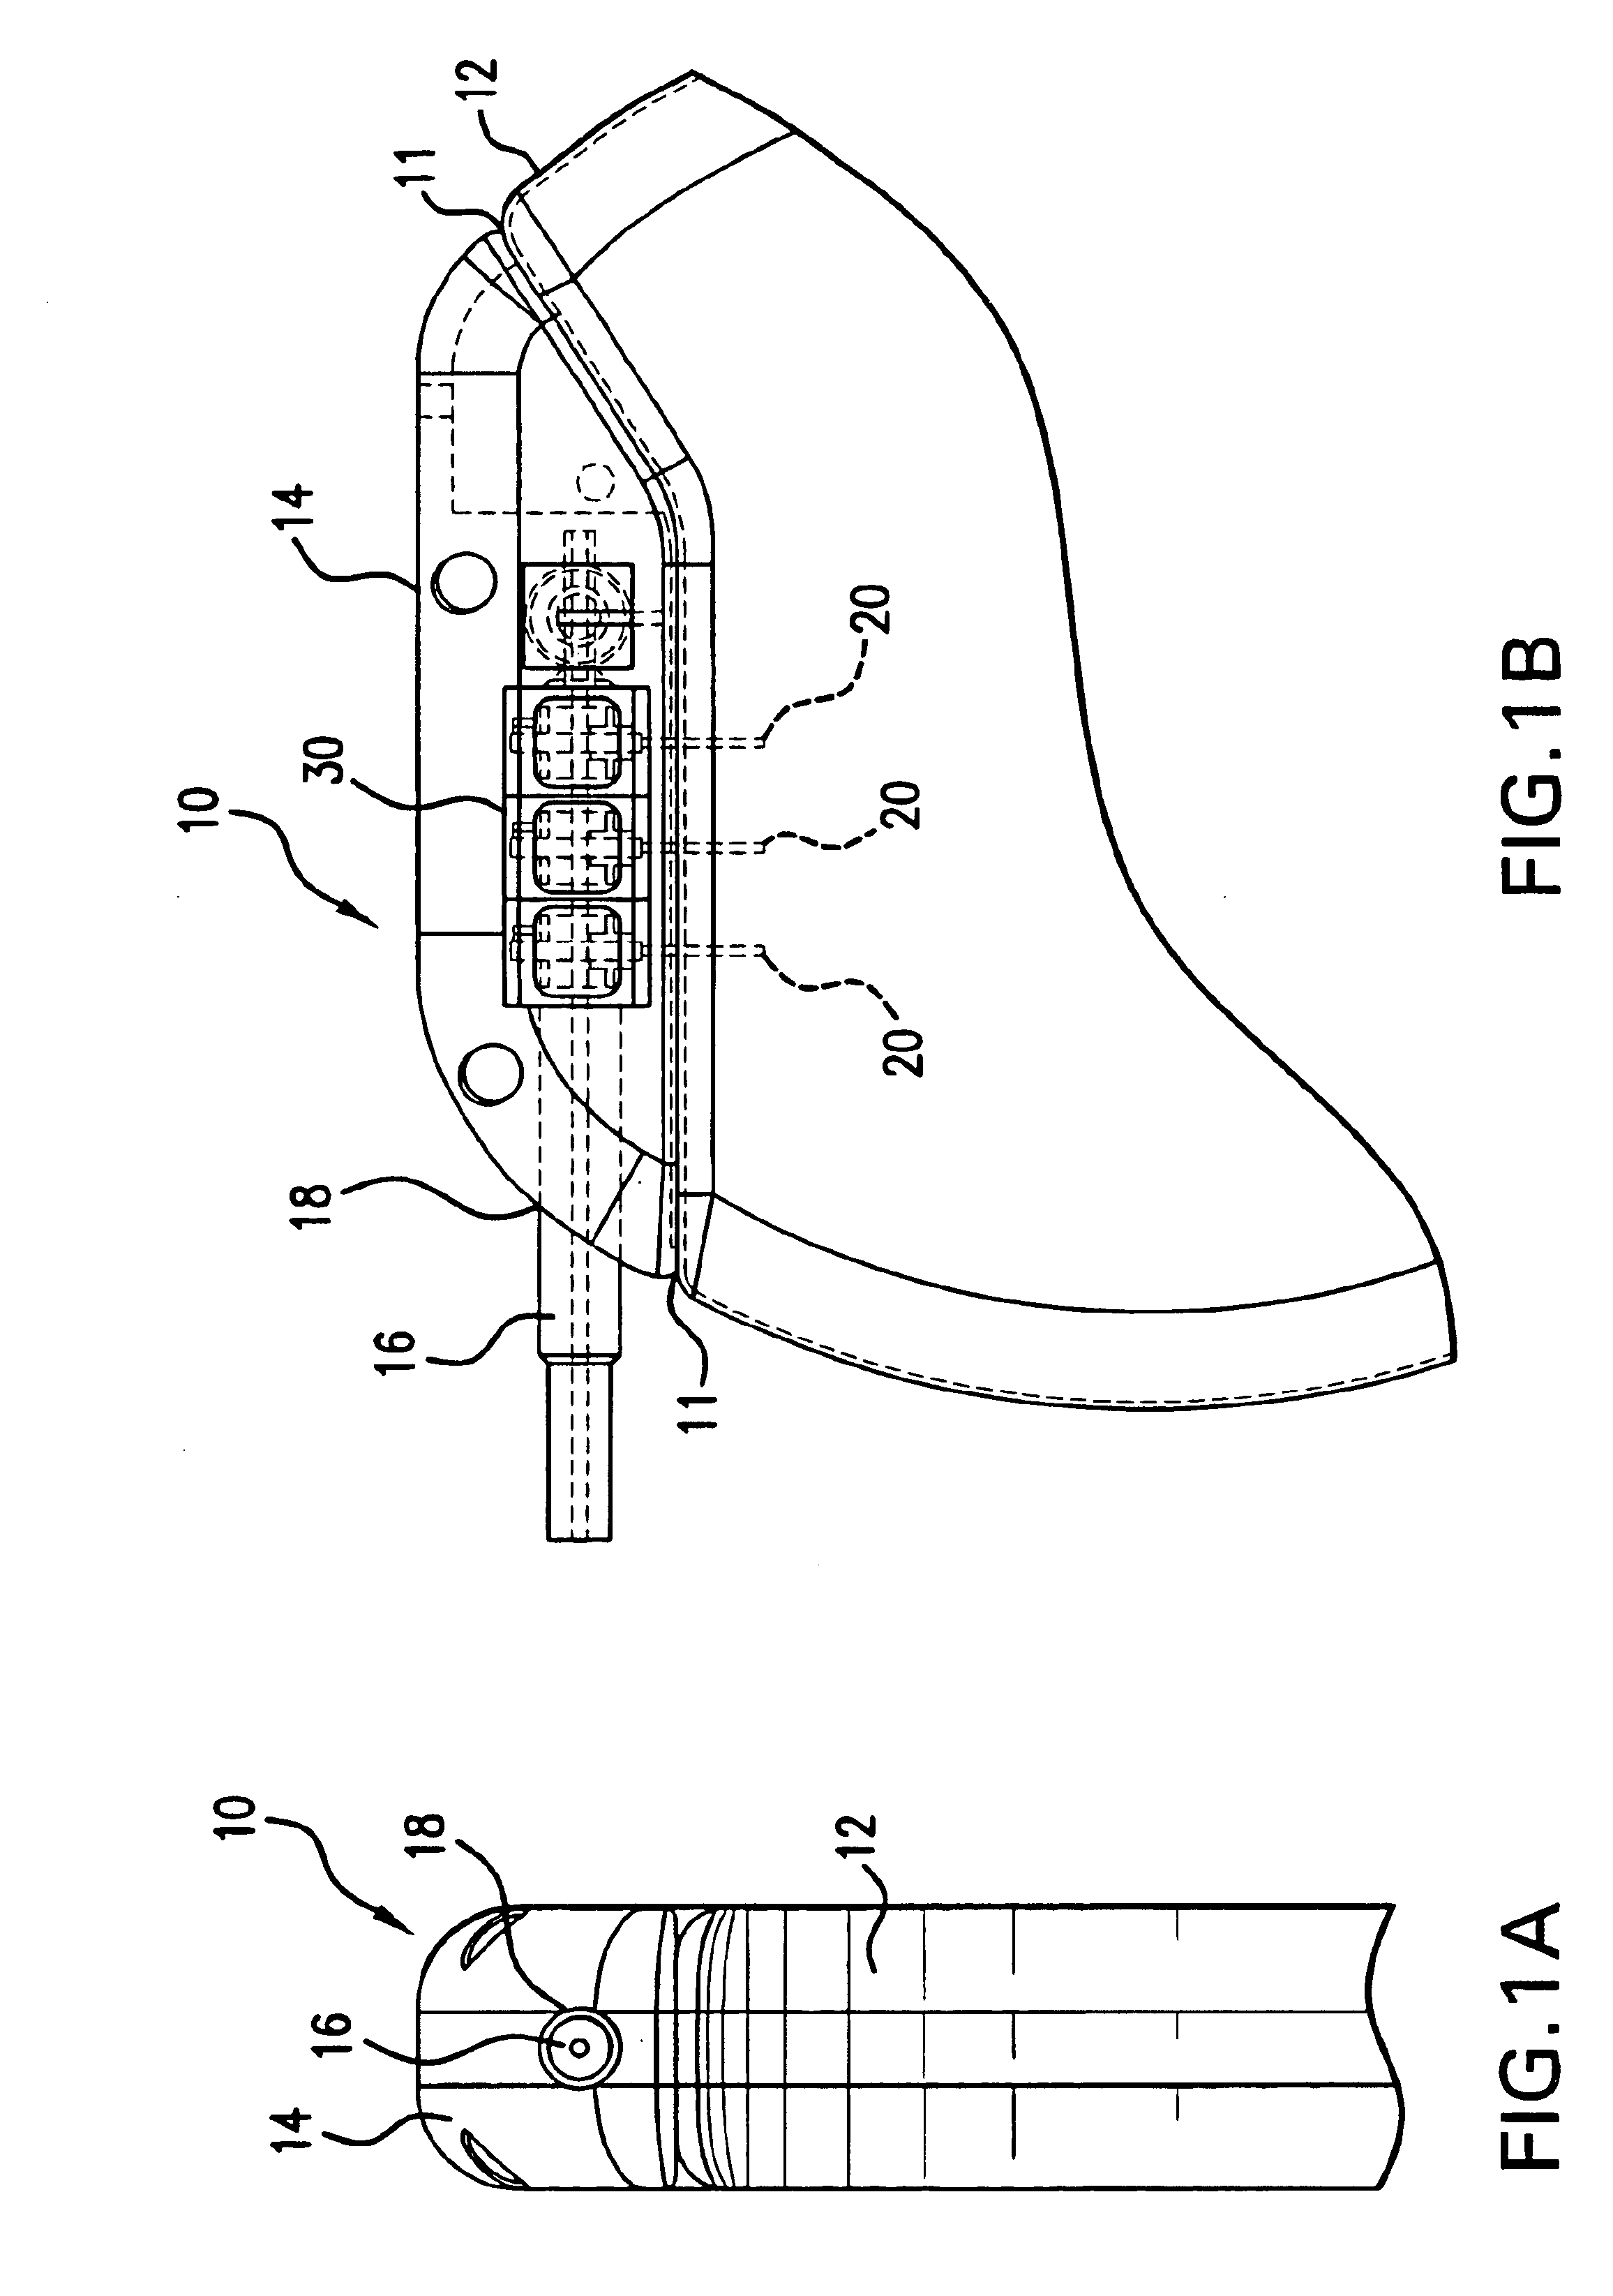 Connector apparatus for a medical device